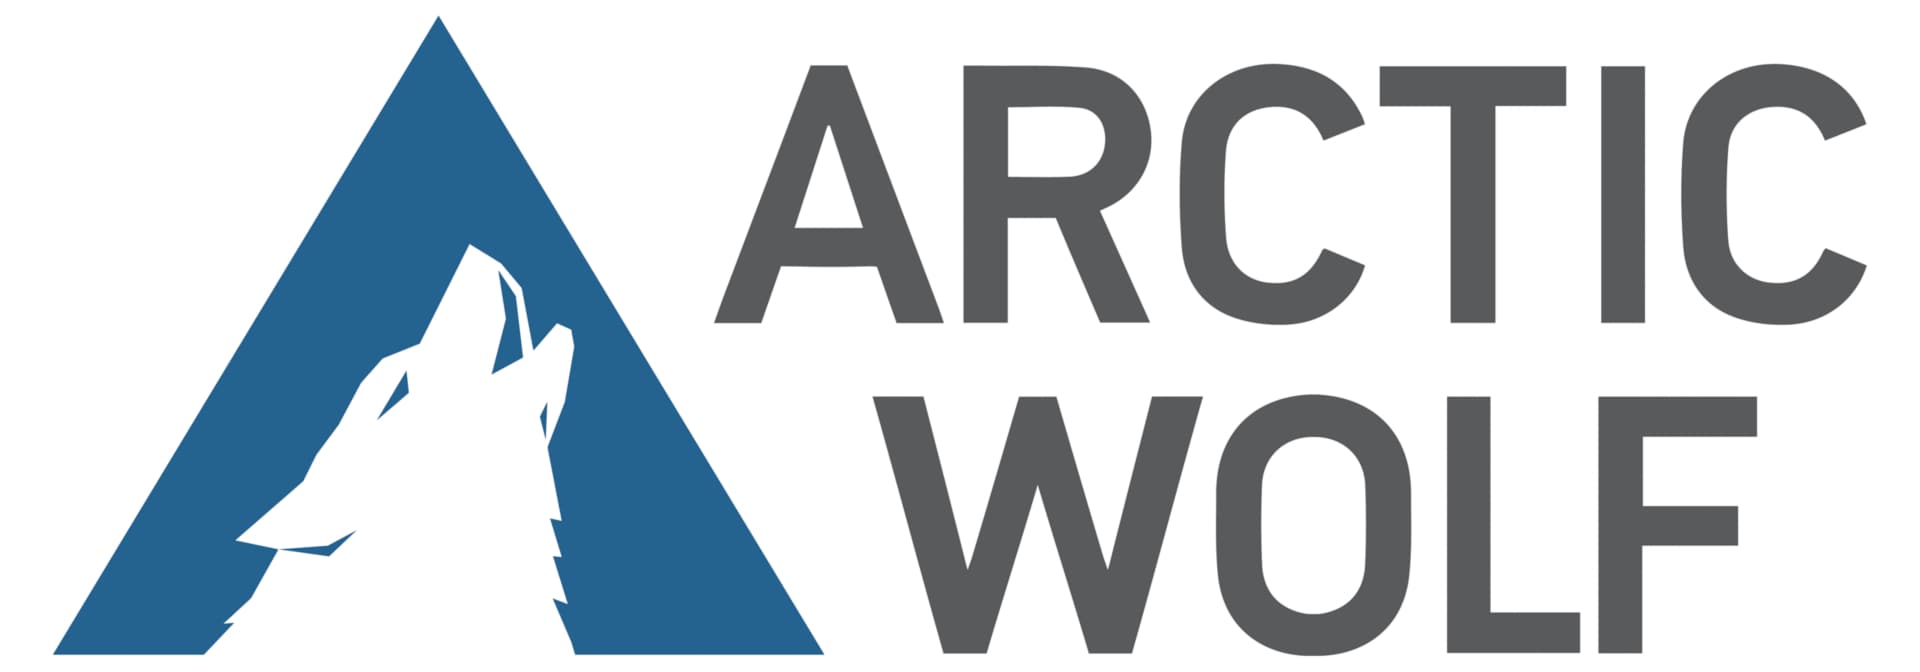 Arctic Wolf Managed Detection and Response - subscription license (6 months) - 1 license